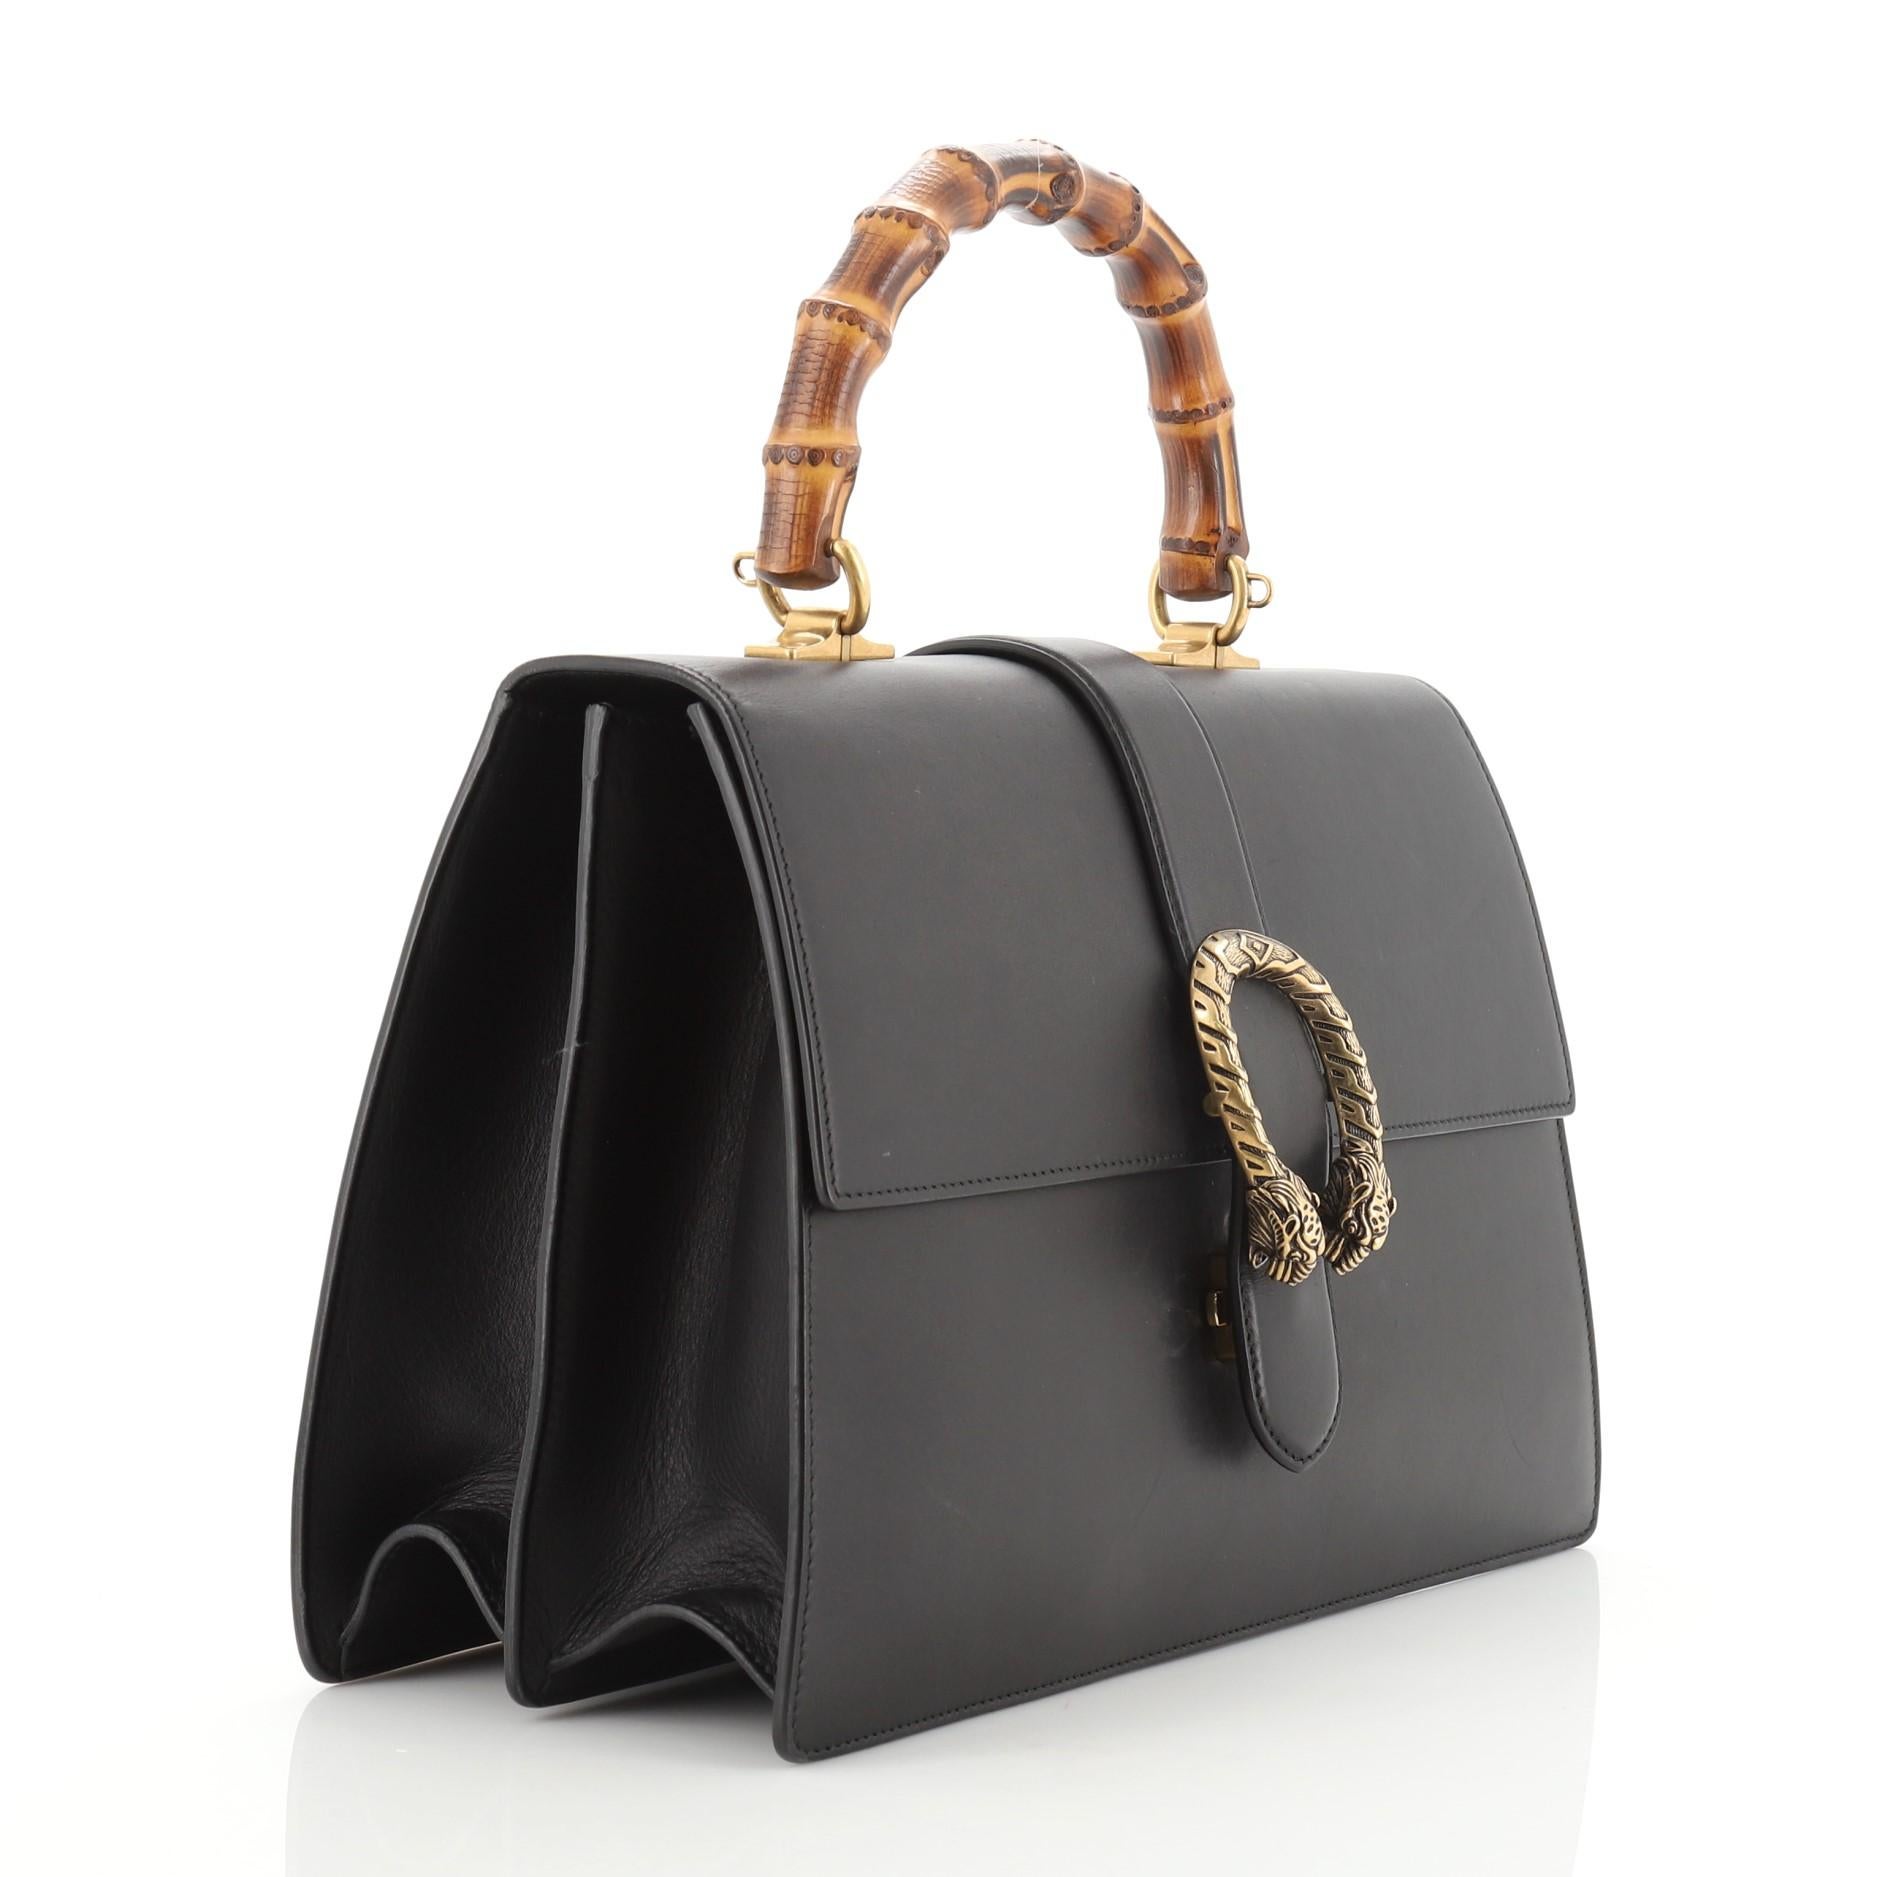 This Gucci Dionysus Bamboo Top Handle Bag Leather Large, crafted from black leather, features a bamboo top handle, textured tiger head spur detail on its flap, and aged gold-tone hardware. Its flap closure with side release opens to a neutral fabric